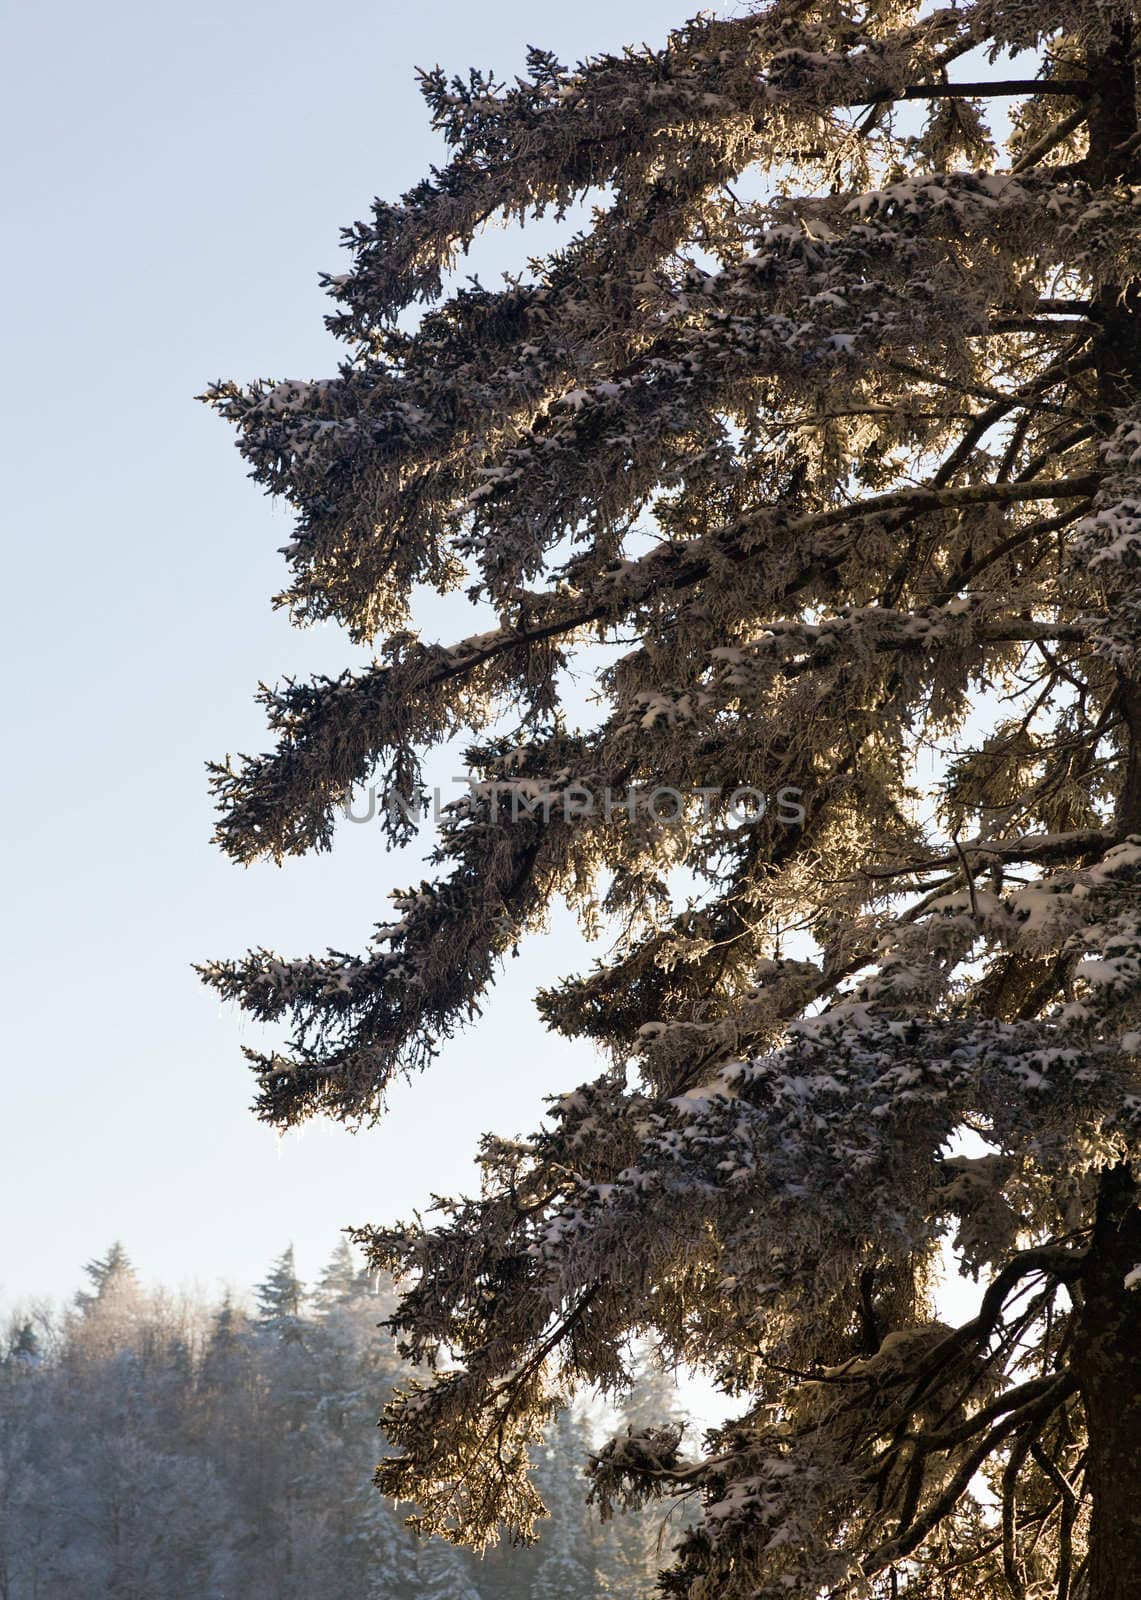 Pine trees covered in snow on skyline by steheap